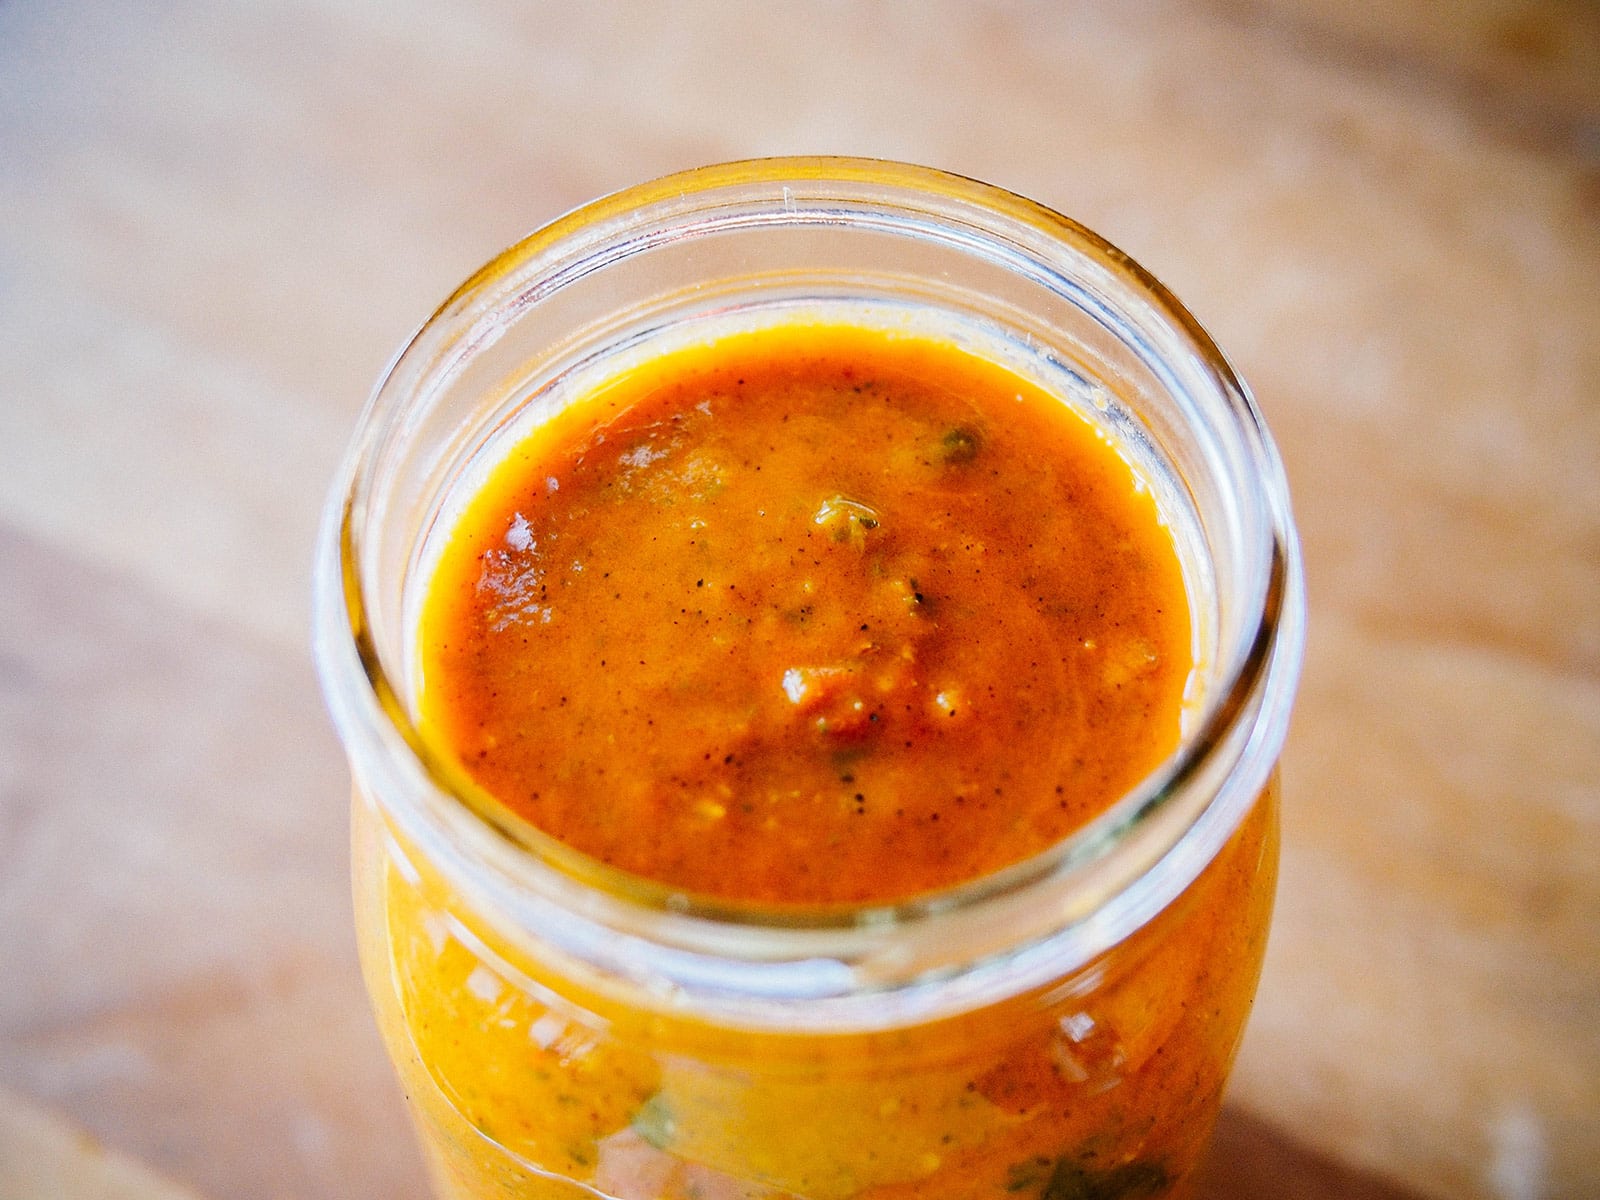 Homemade spicy minty tomato sauce in a jar